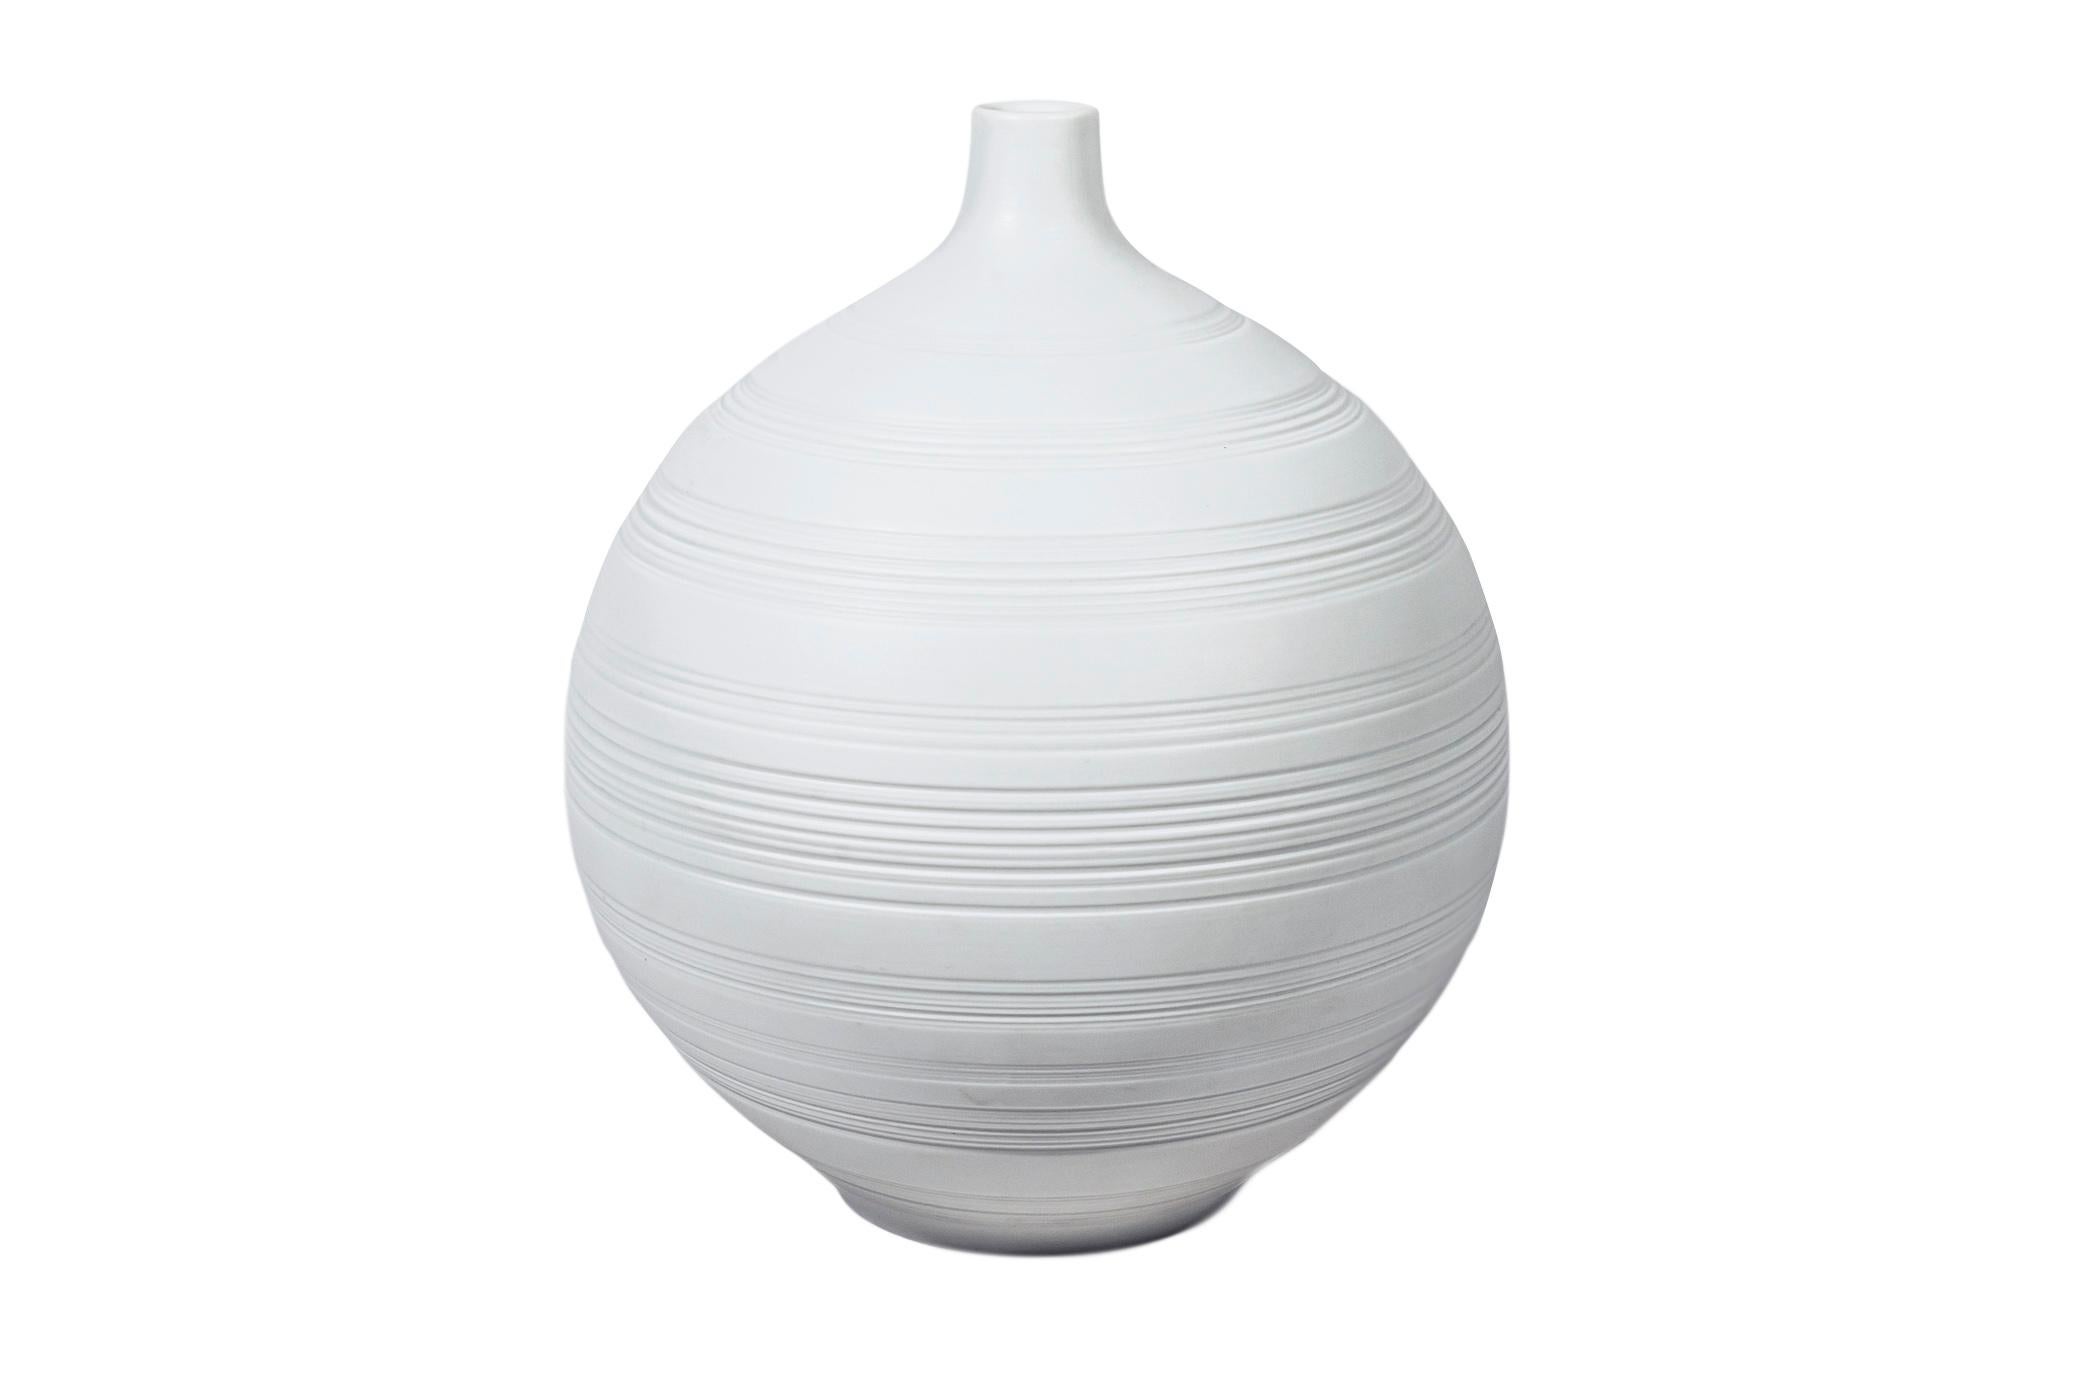 Hans Achtziger (1918-2003), Vases, 
White enameled ceramics,
Grooves decor, 
Edition Hutschenreuther,
Manufacture stamp on the bottom,
Germany, circa 1960.

Measures:
(Small) diameter 12 cm, height 13 cm.
(Big) diameter 28 cm, height 30 cm.